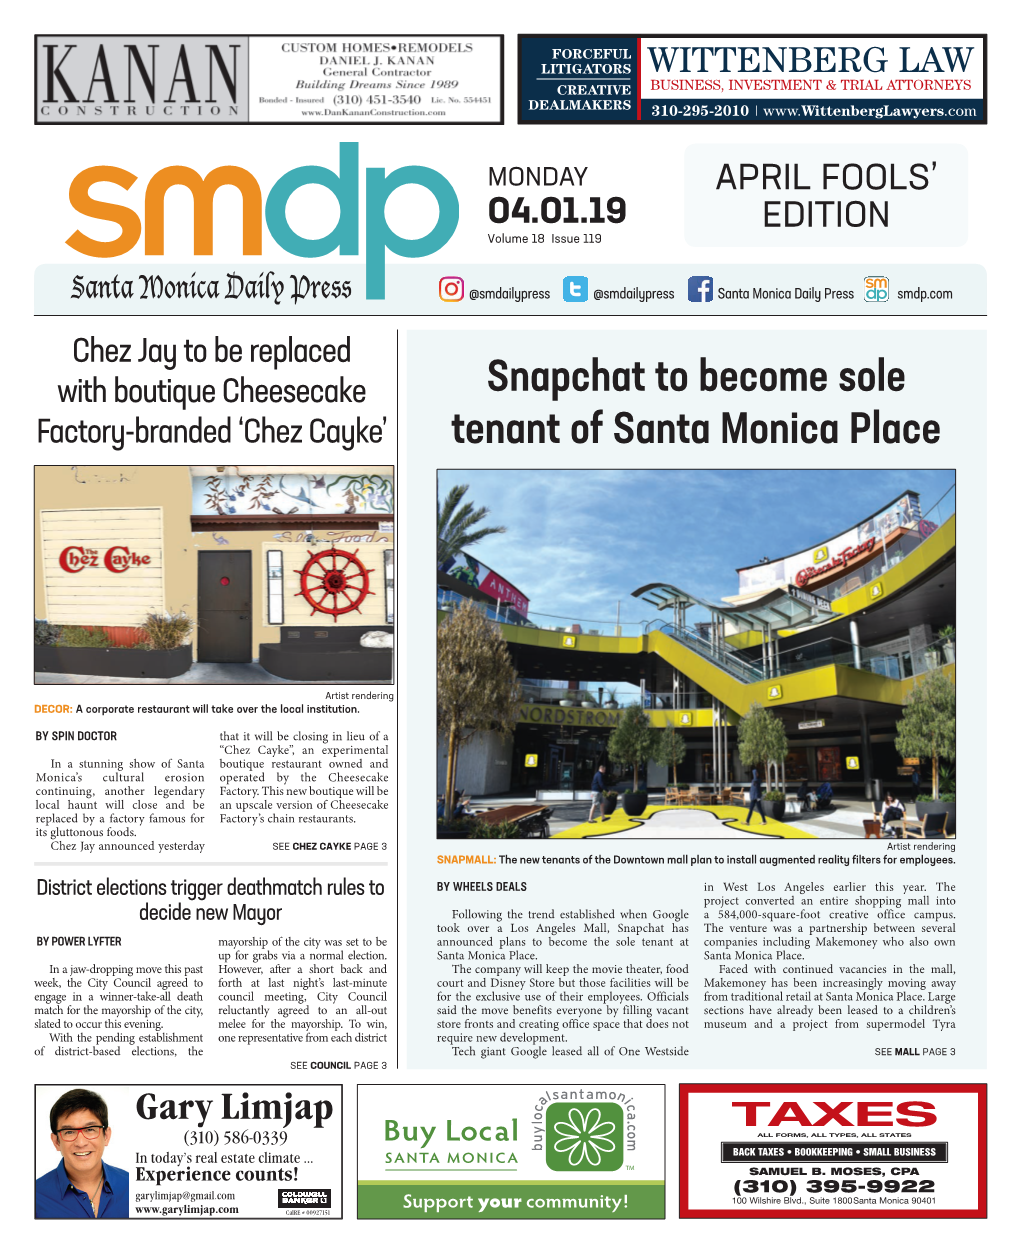 Snapchat to Become Sole Tenant of Santa Monica Place